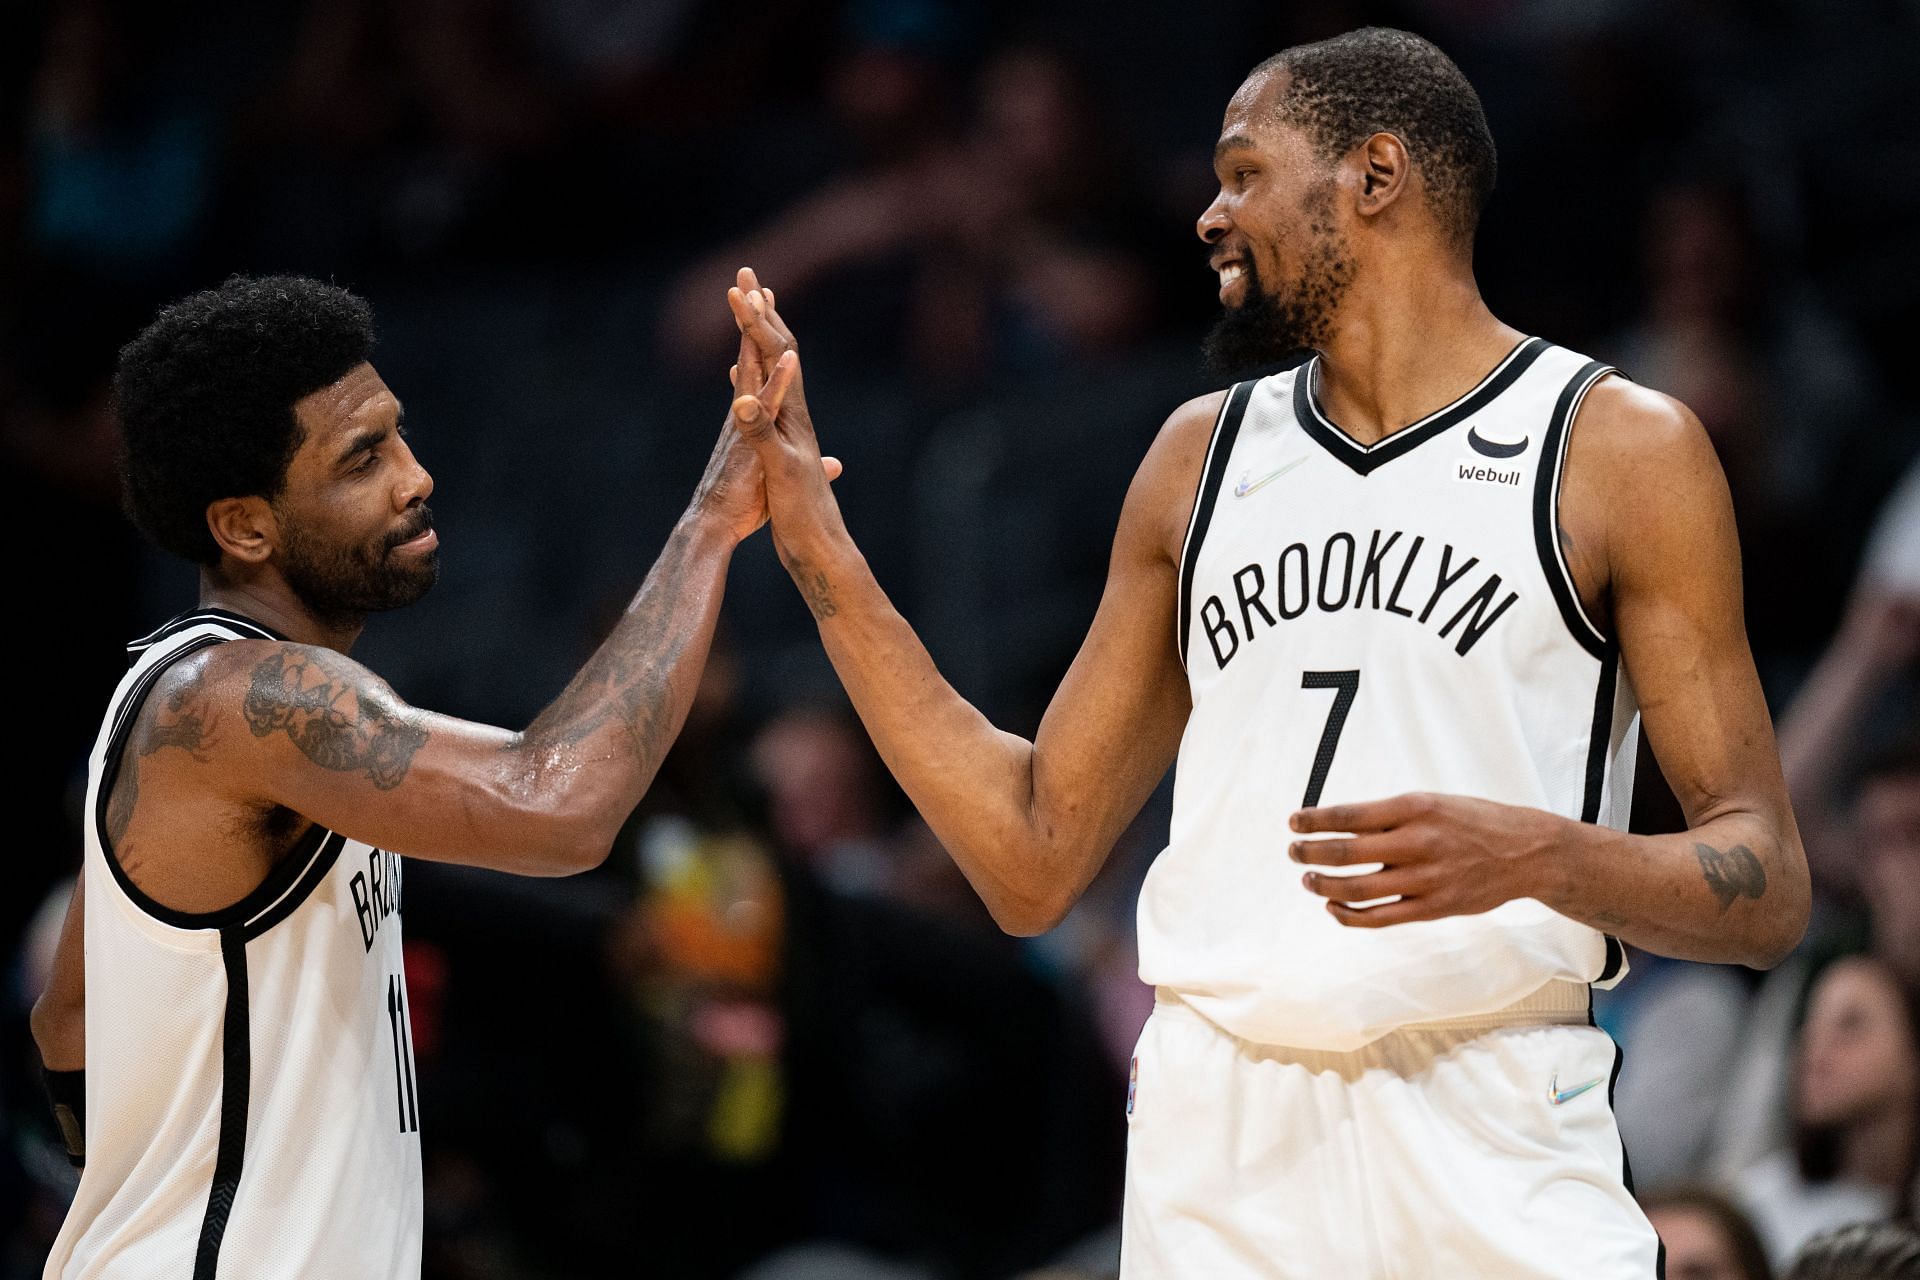 Kevin Durant (7) congratulates Kyrie Irving of the Brooklyn Nets.